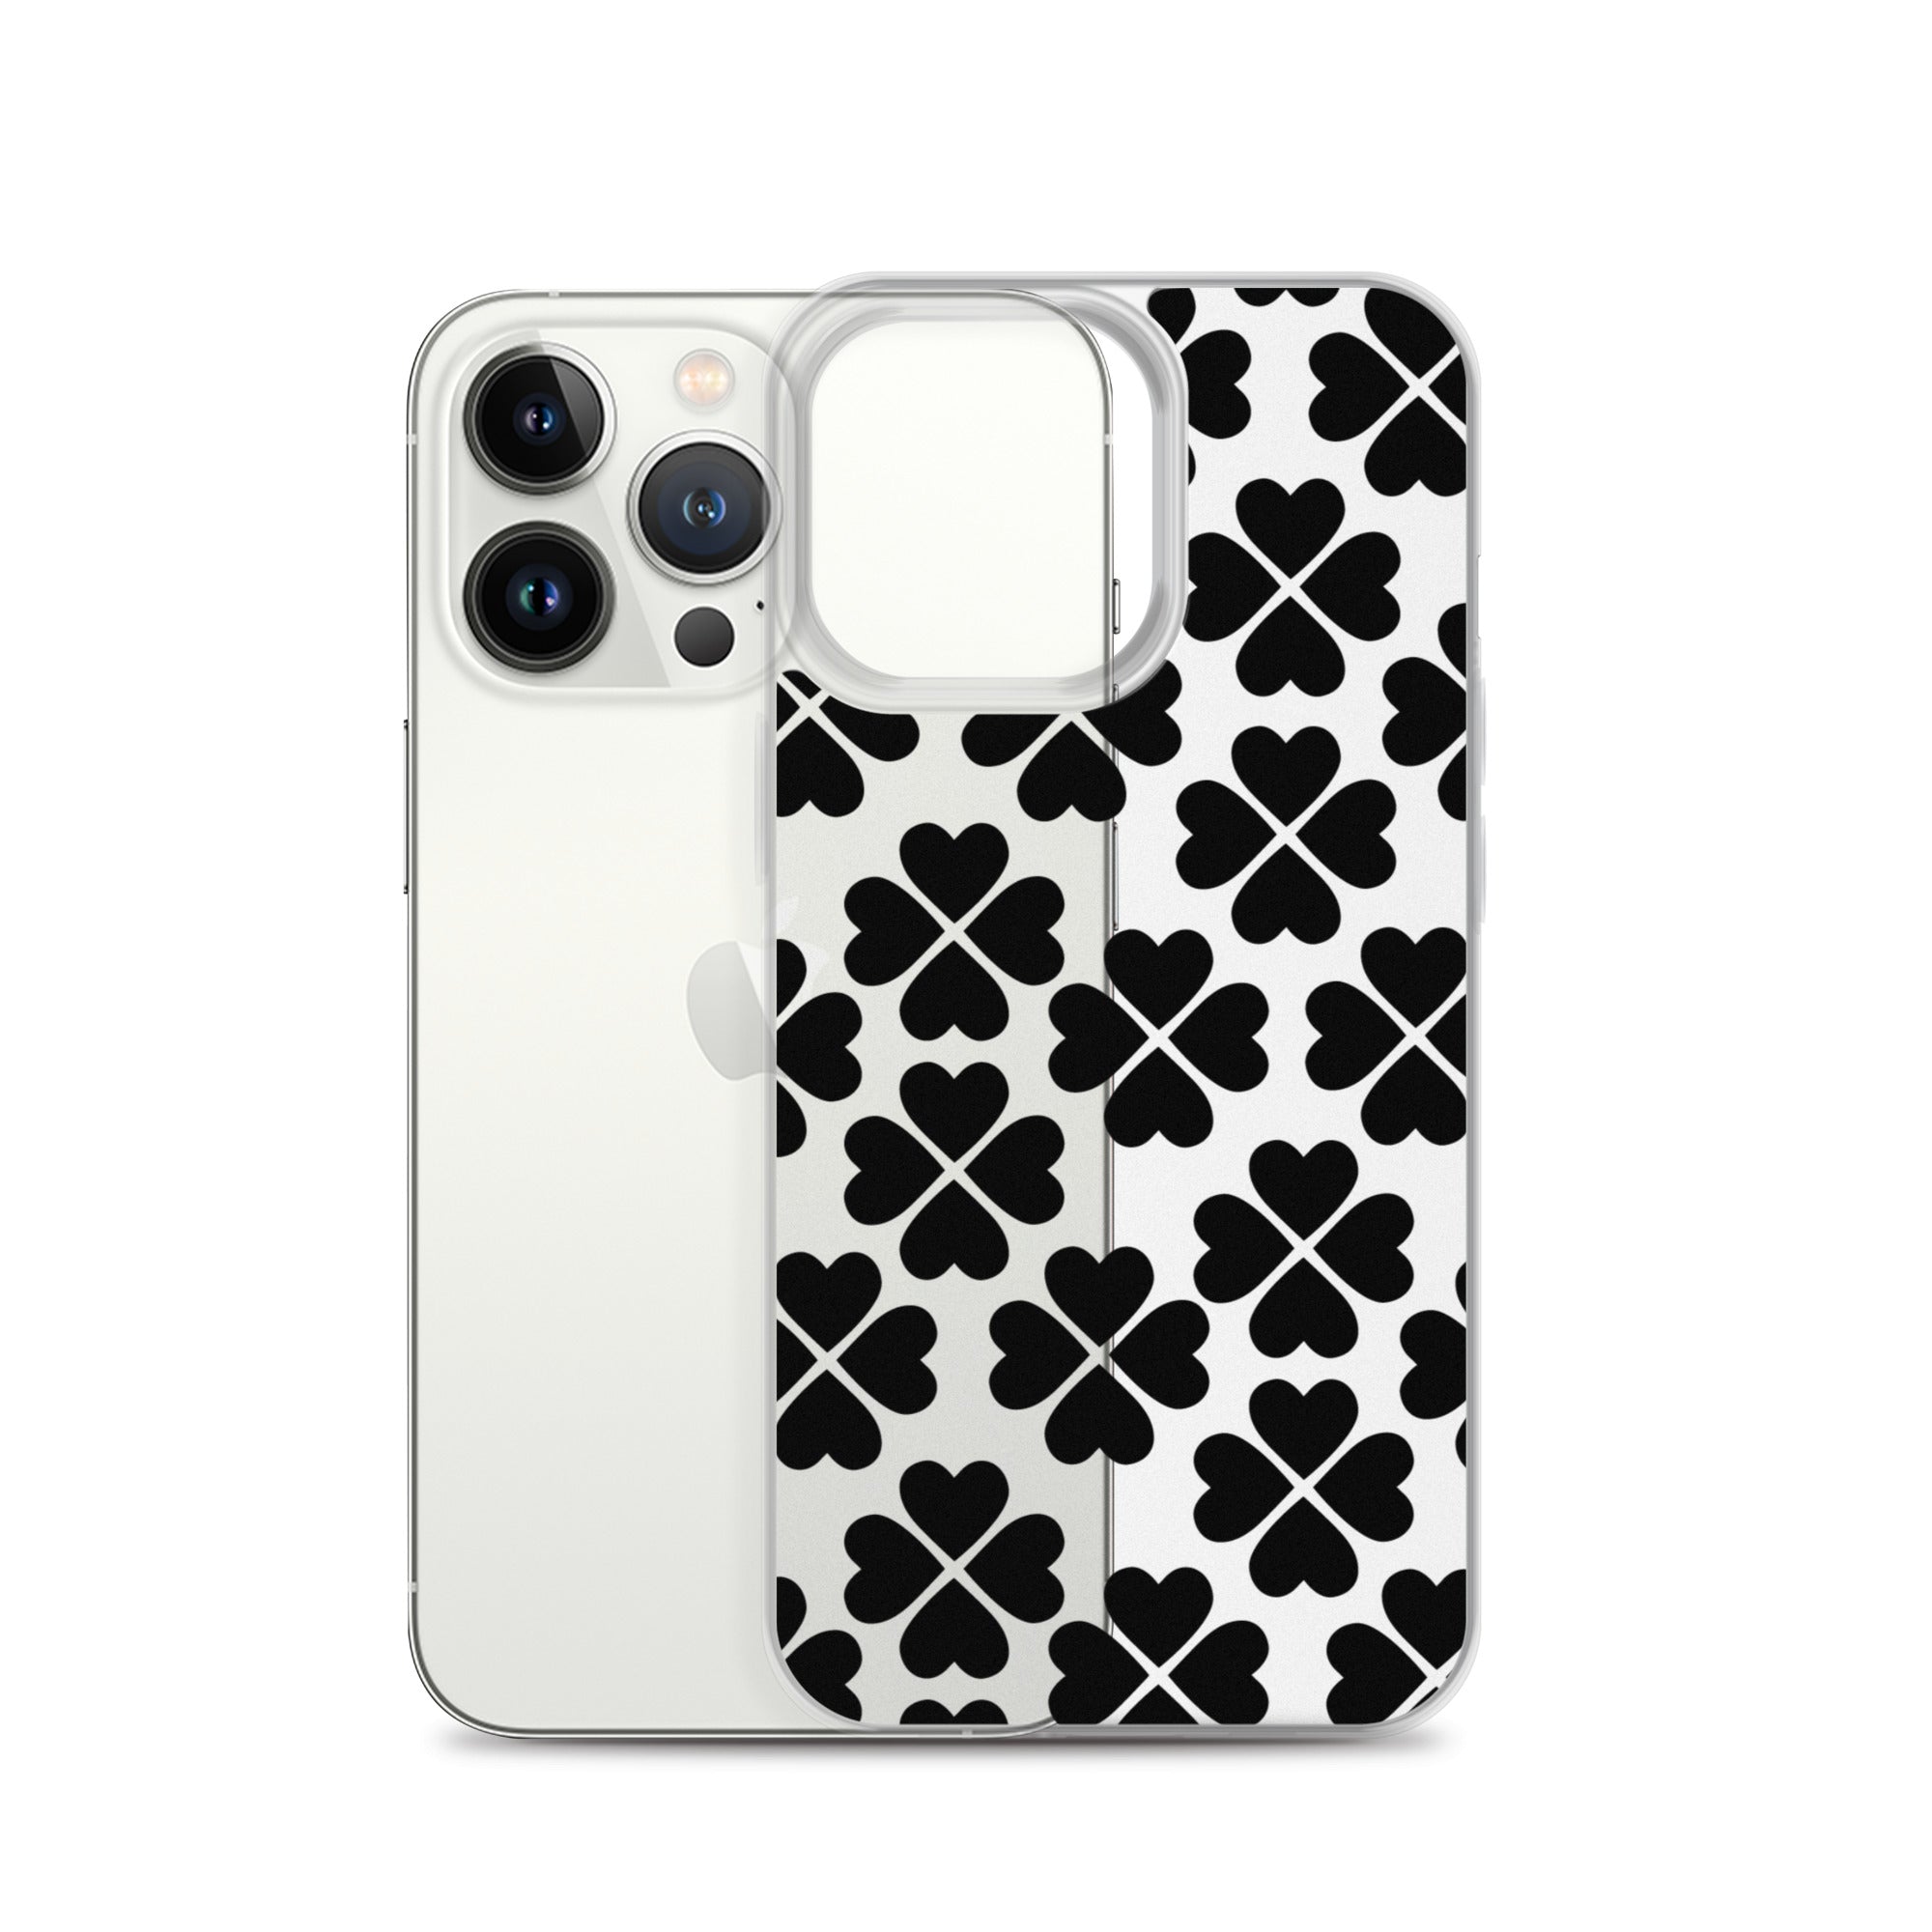 Black Floral iPhone Case -All sizes